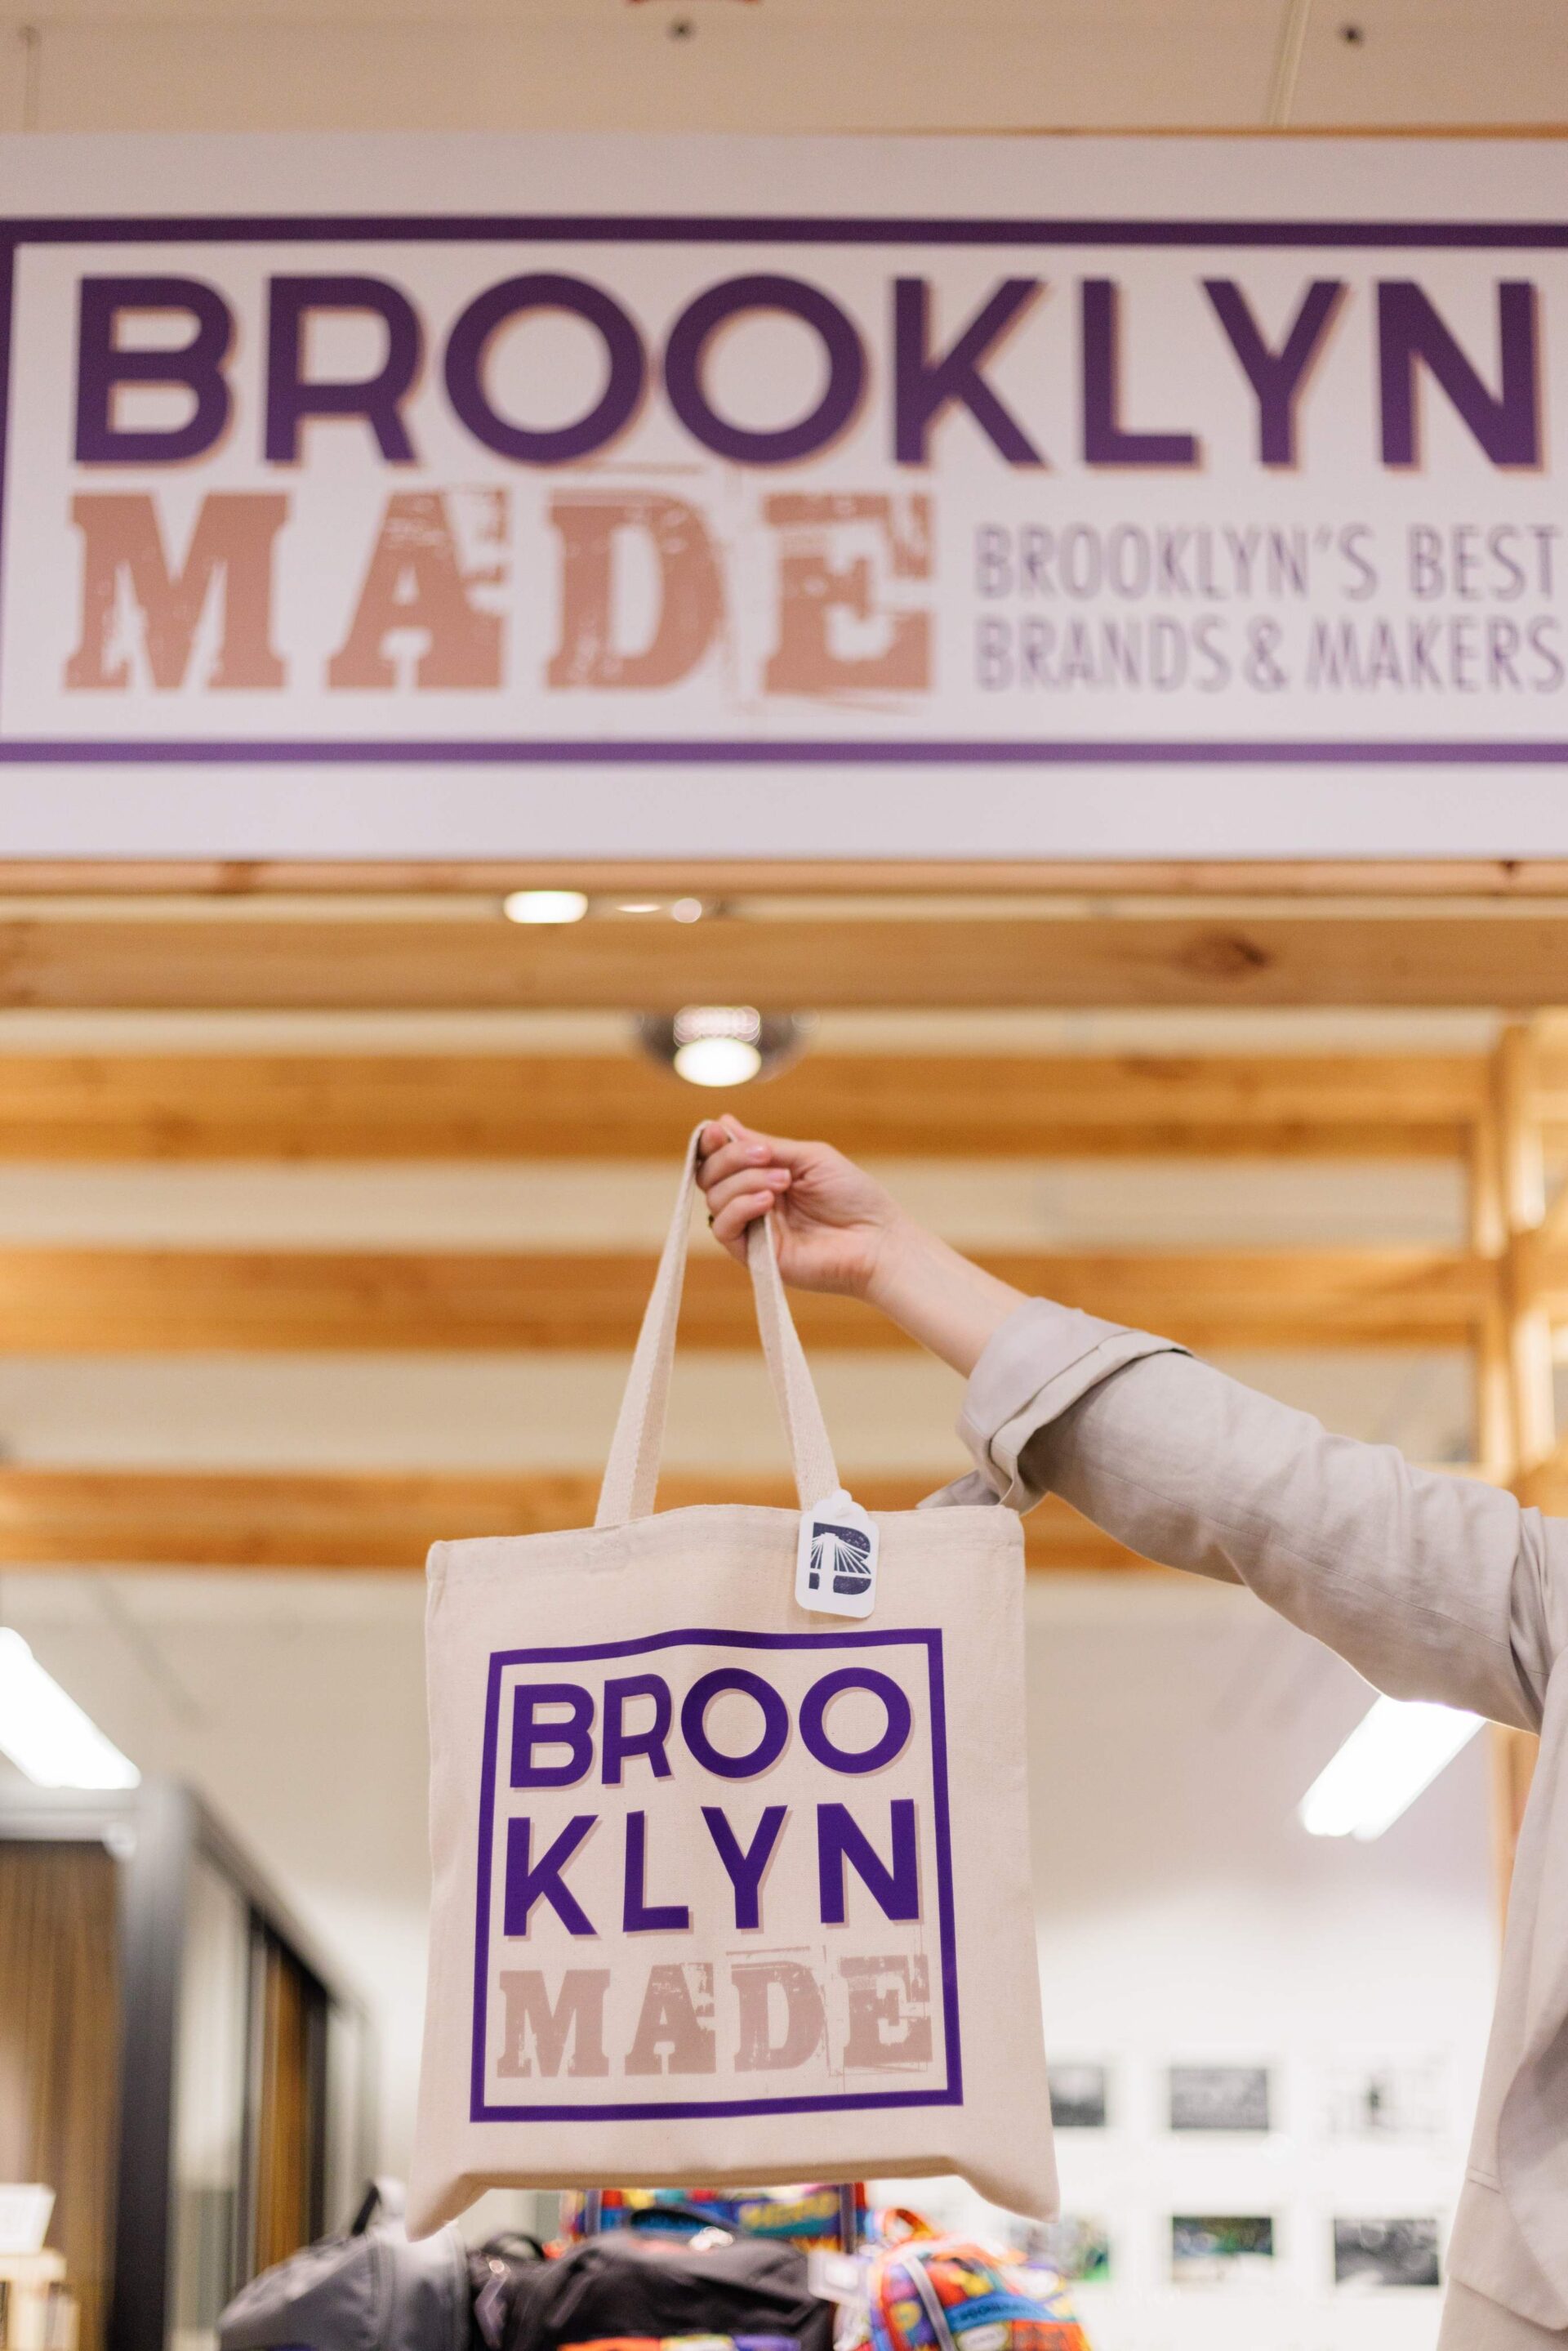 An image of a canvas bag that says "Brooklyn Made."